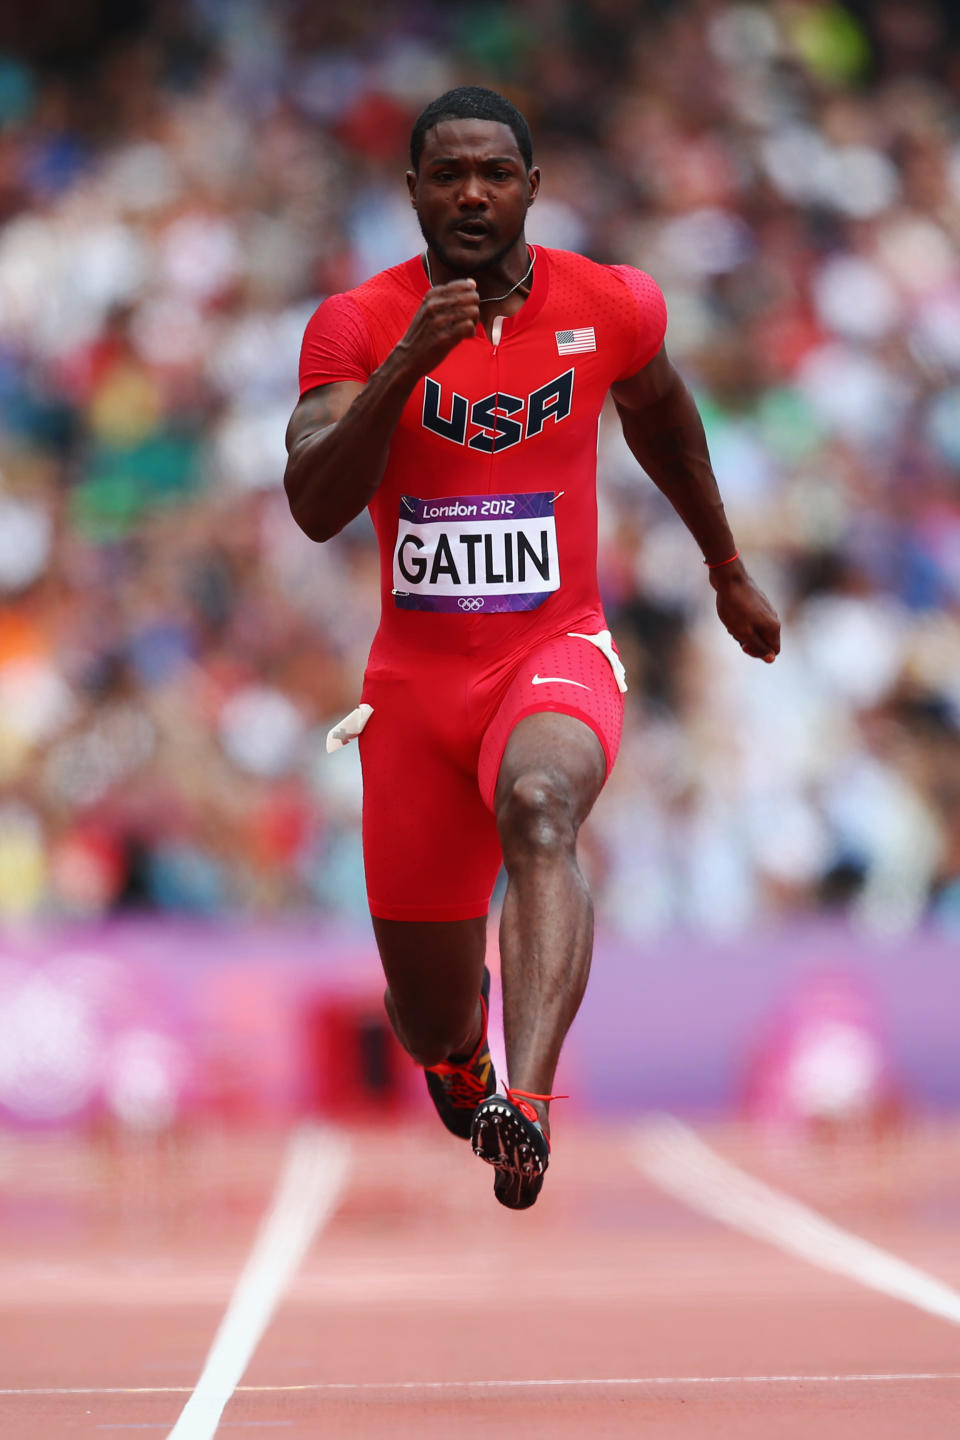 LONDON, ENGLAND - AUGUST 04: Justin Gatlin of the United States competes in the Men's 100m Round 1 Heats on Day 8 of the London 2012 Olympic Games at Olympic Stadium on August 4, 2012 in London, England. (Photo by Michael Steele/Getty Images)